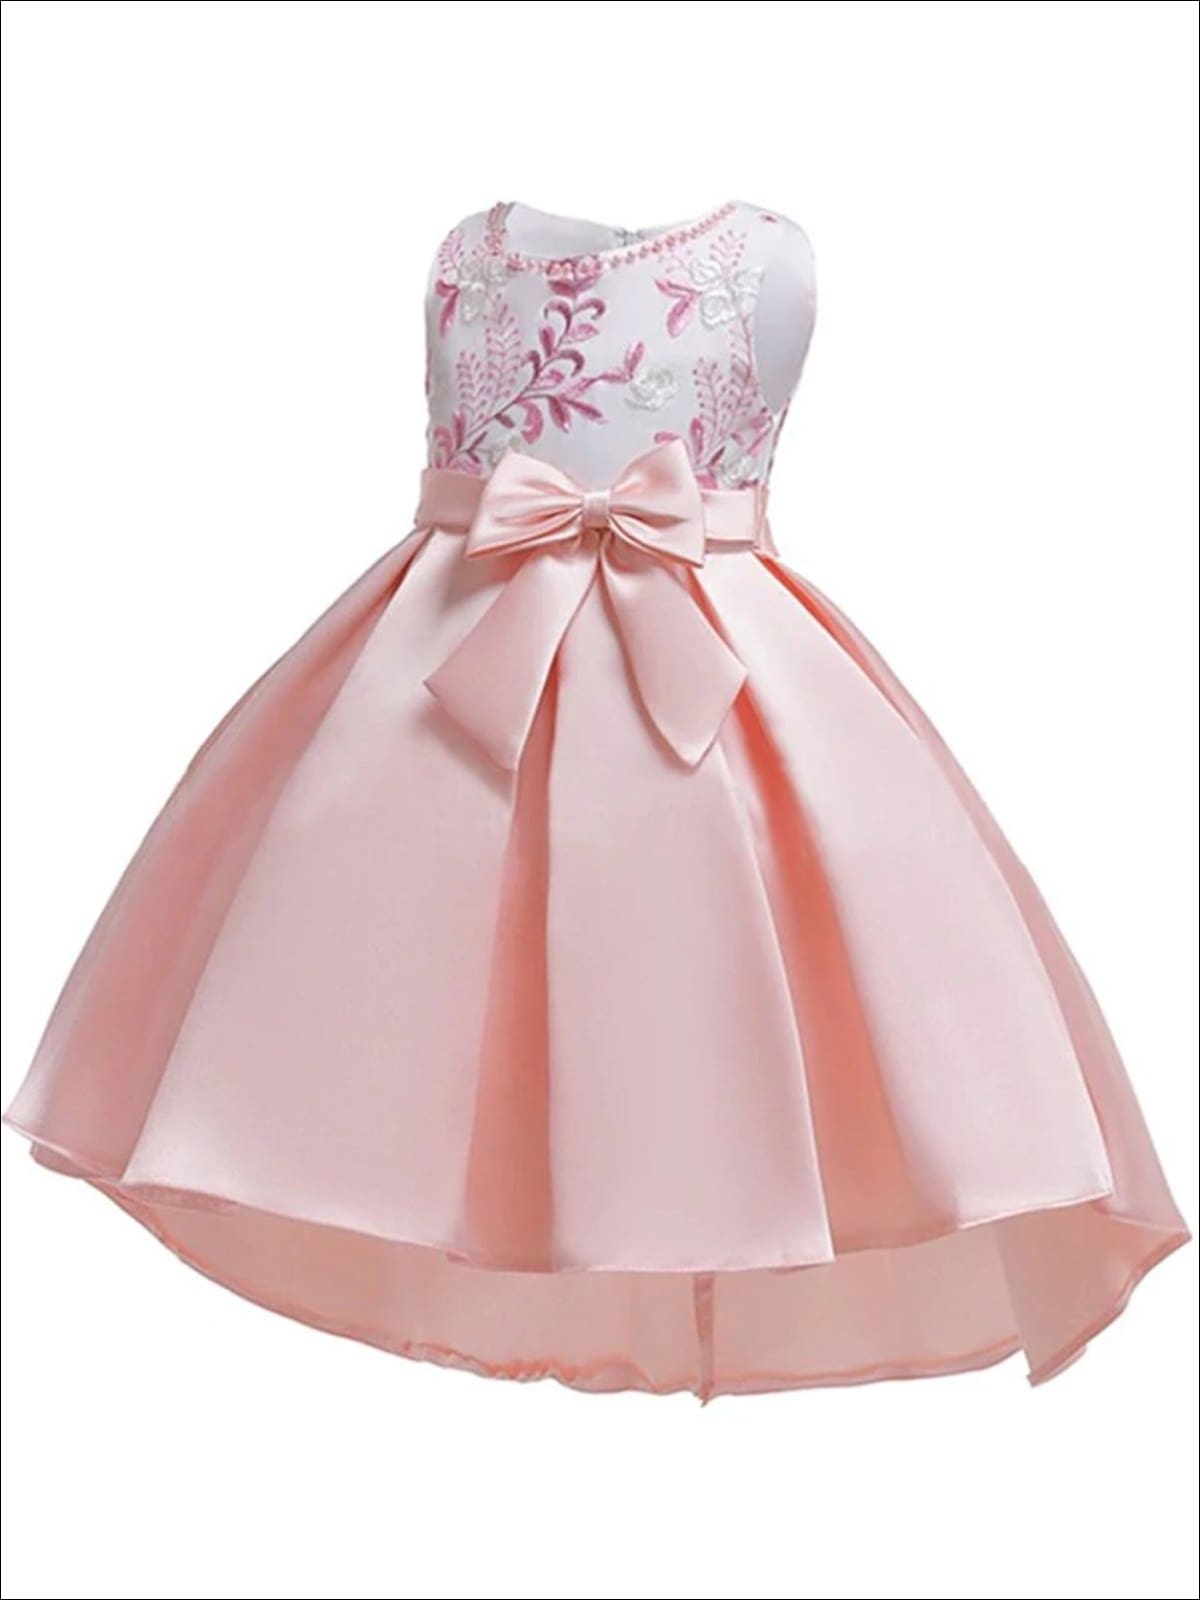 Girls Spring Formal Dress | Floral Embroidered Pleated Party Dress